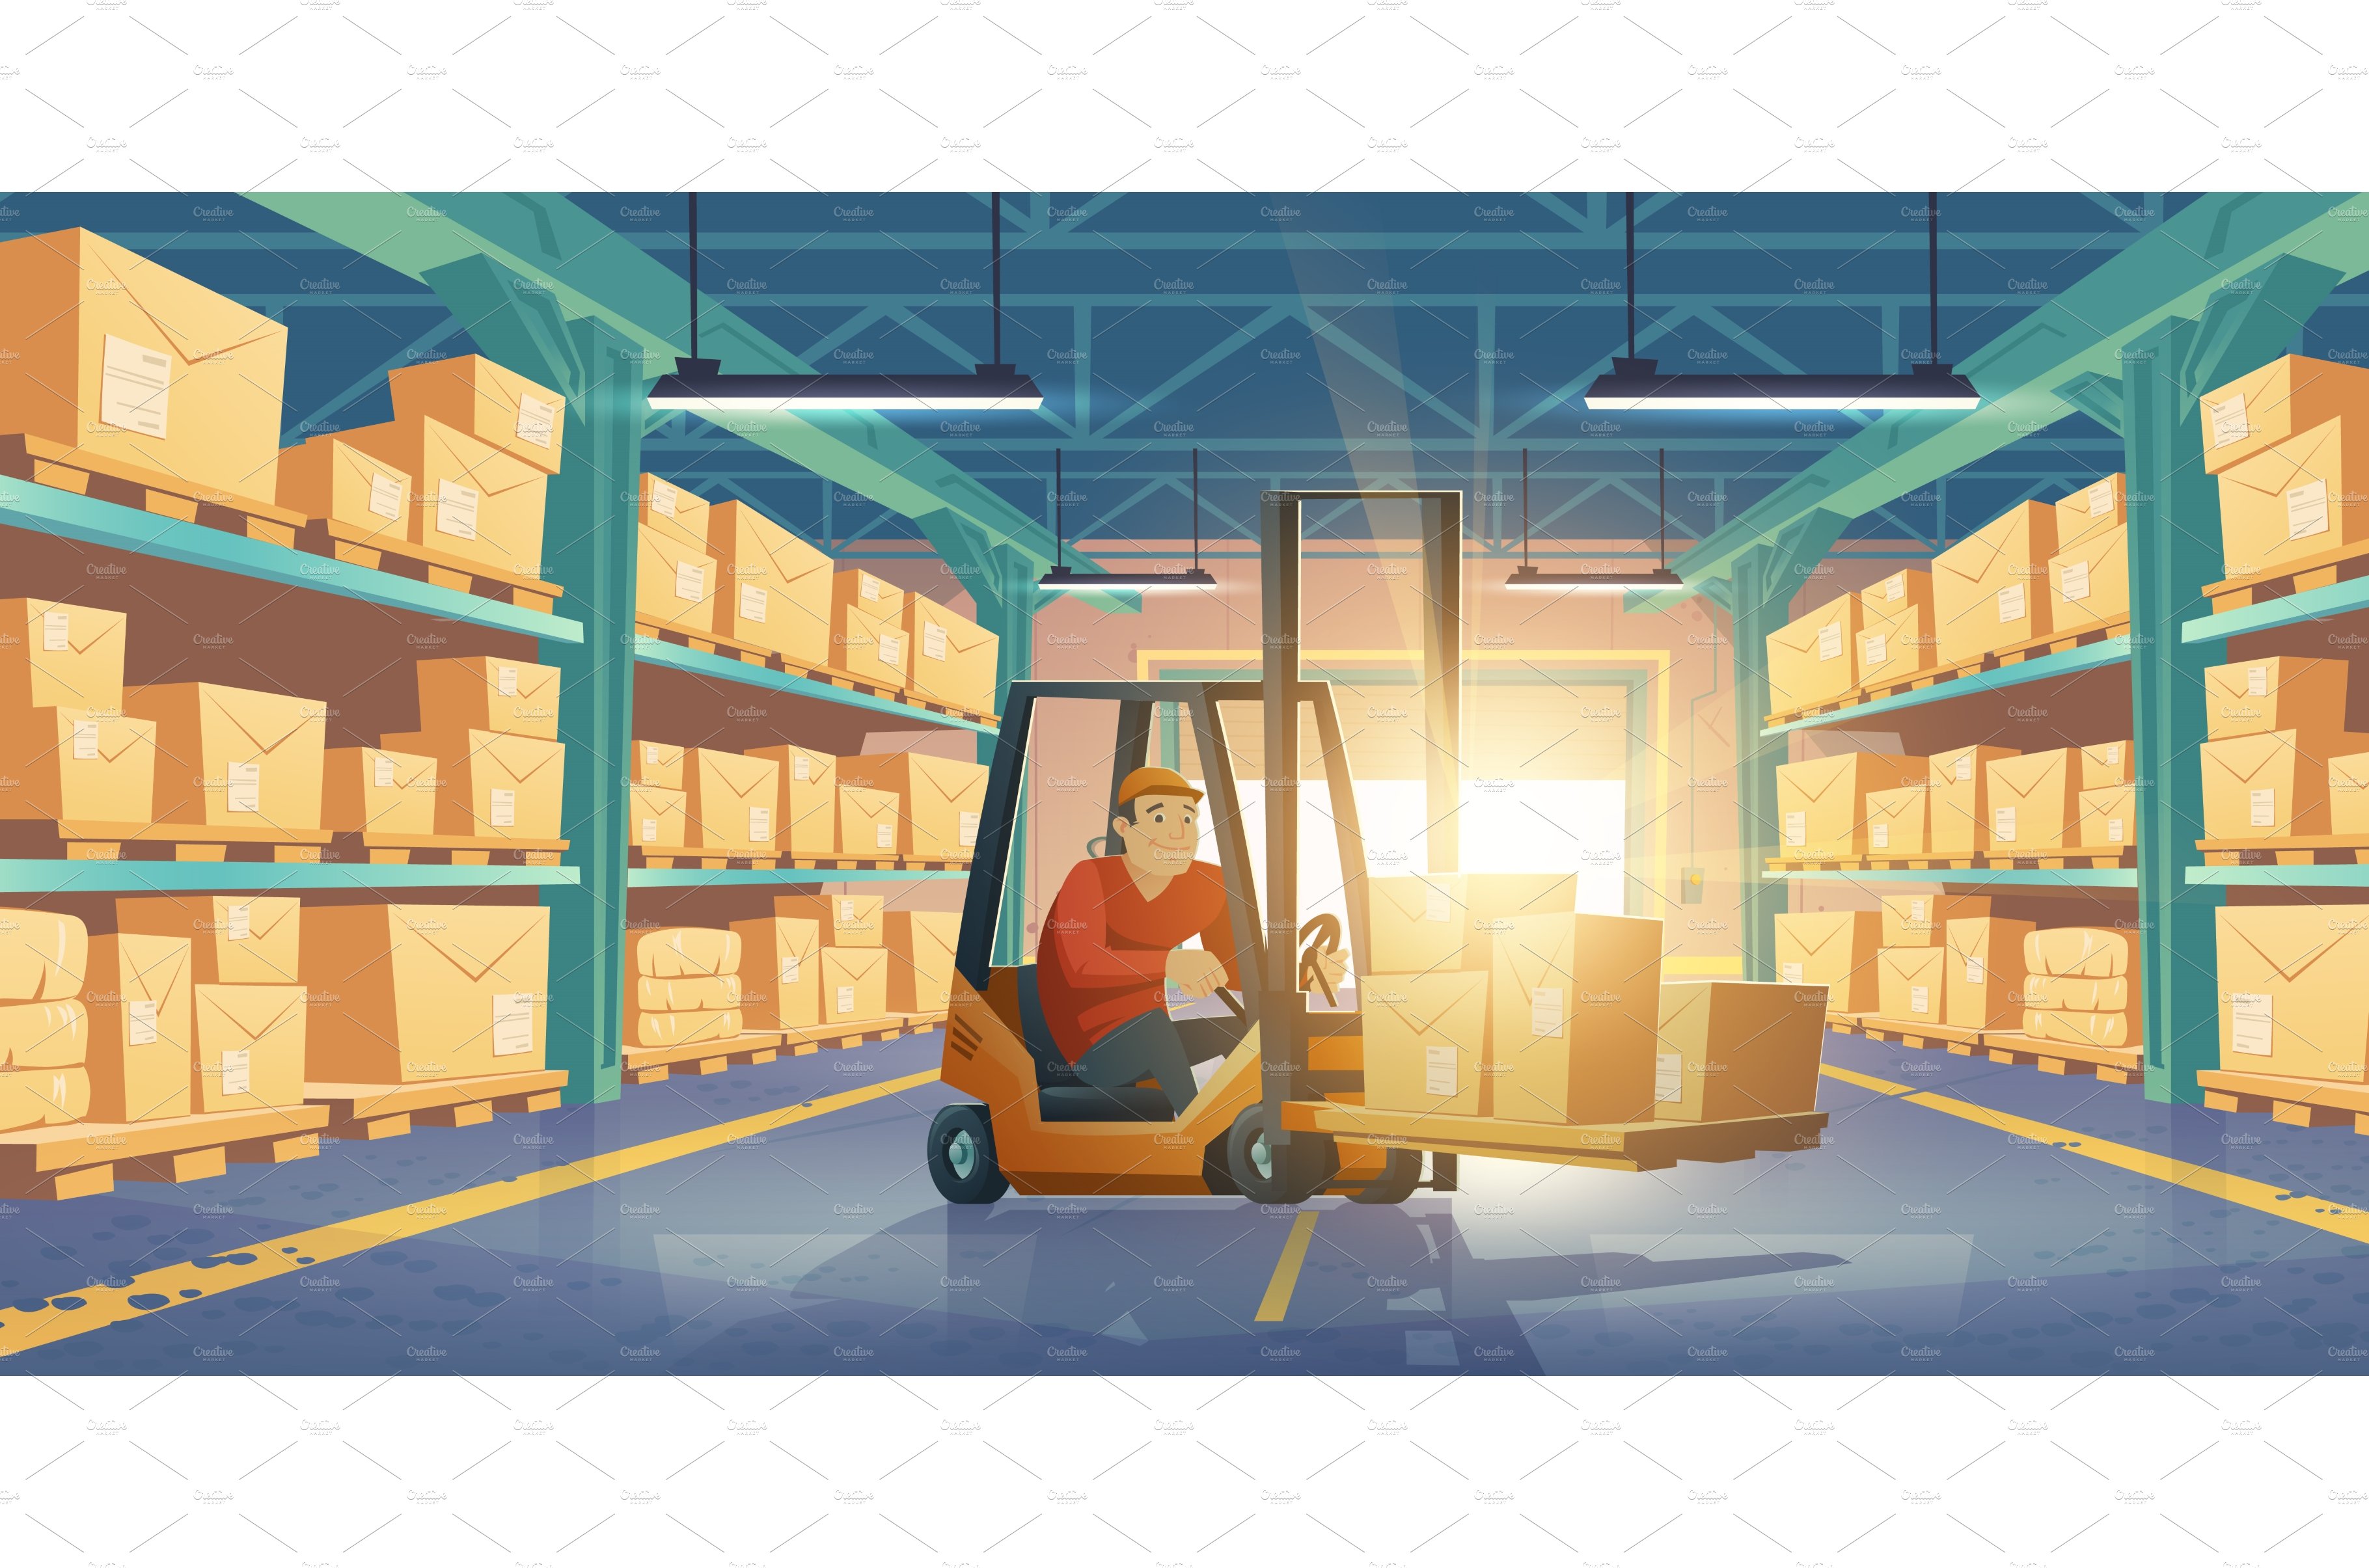 Warehouse with man worker, forklift cover image.